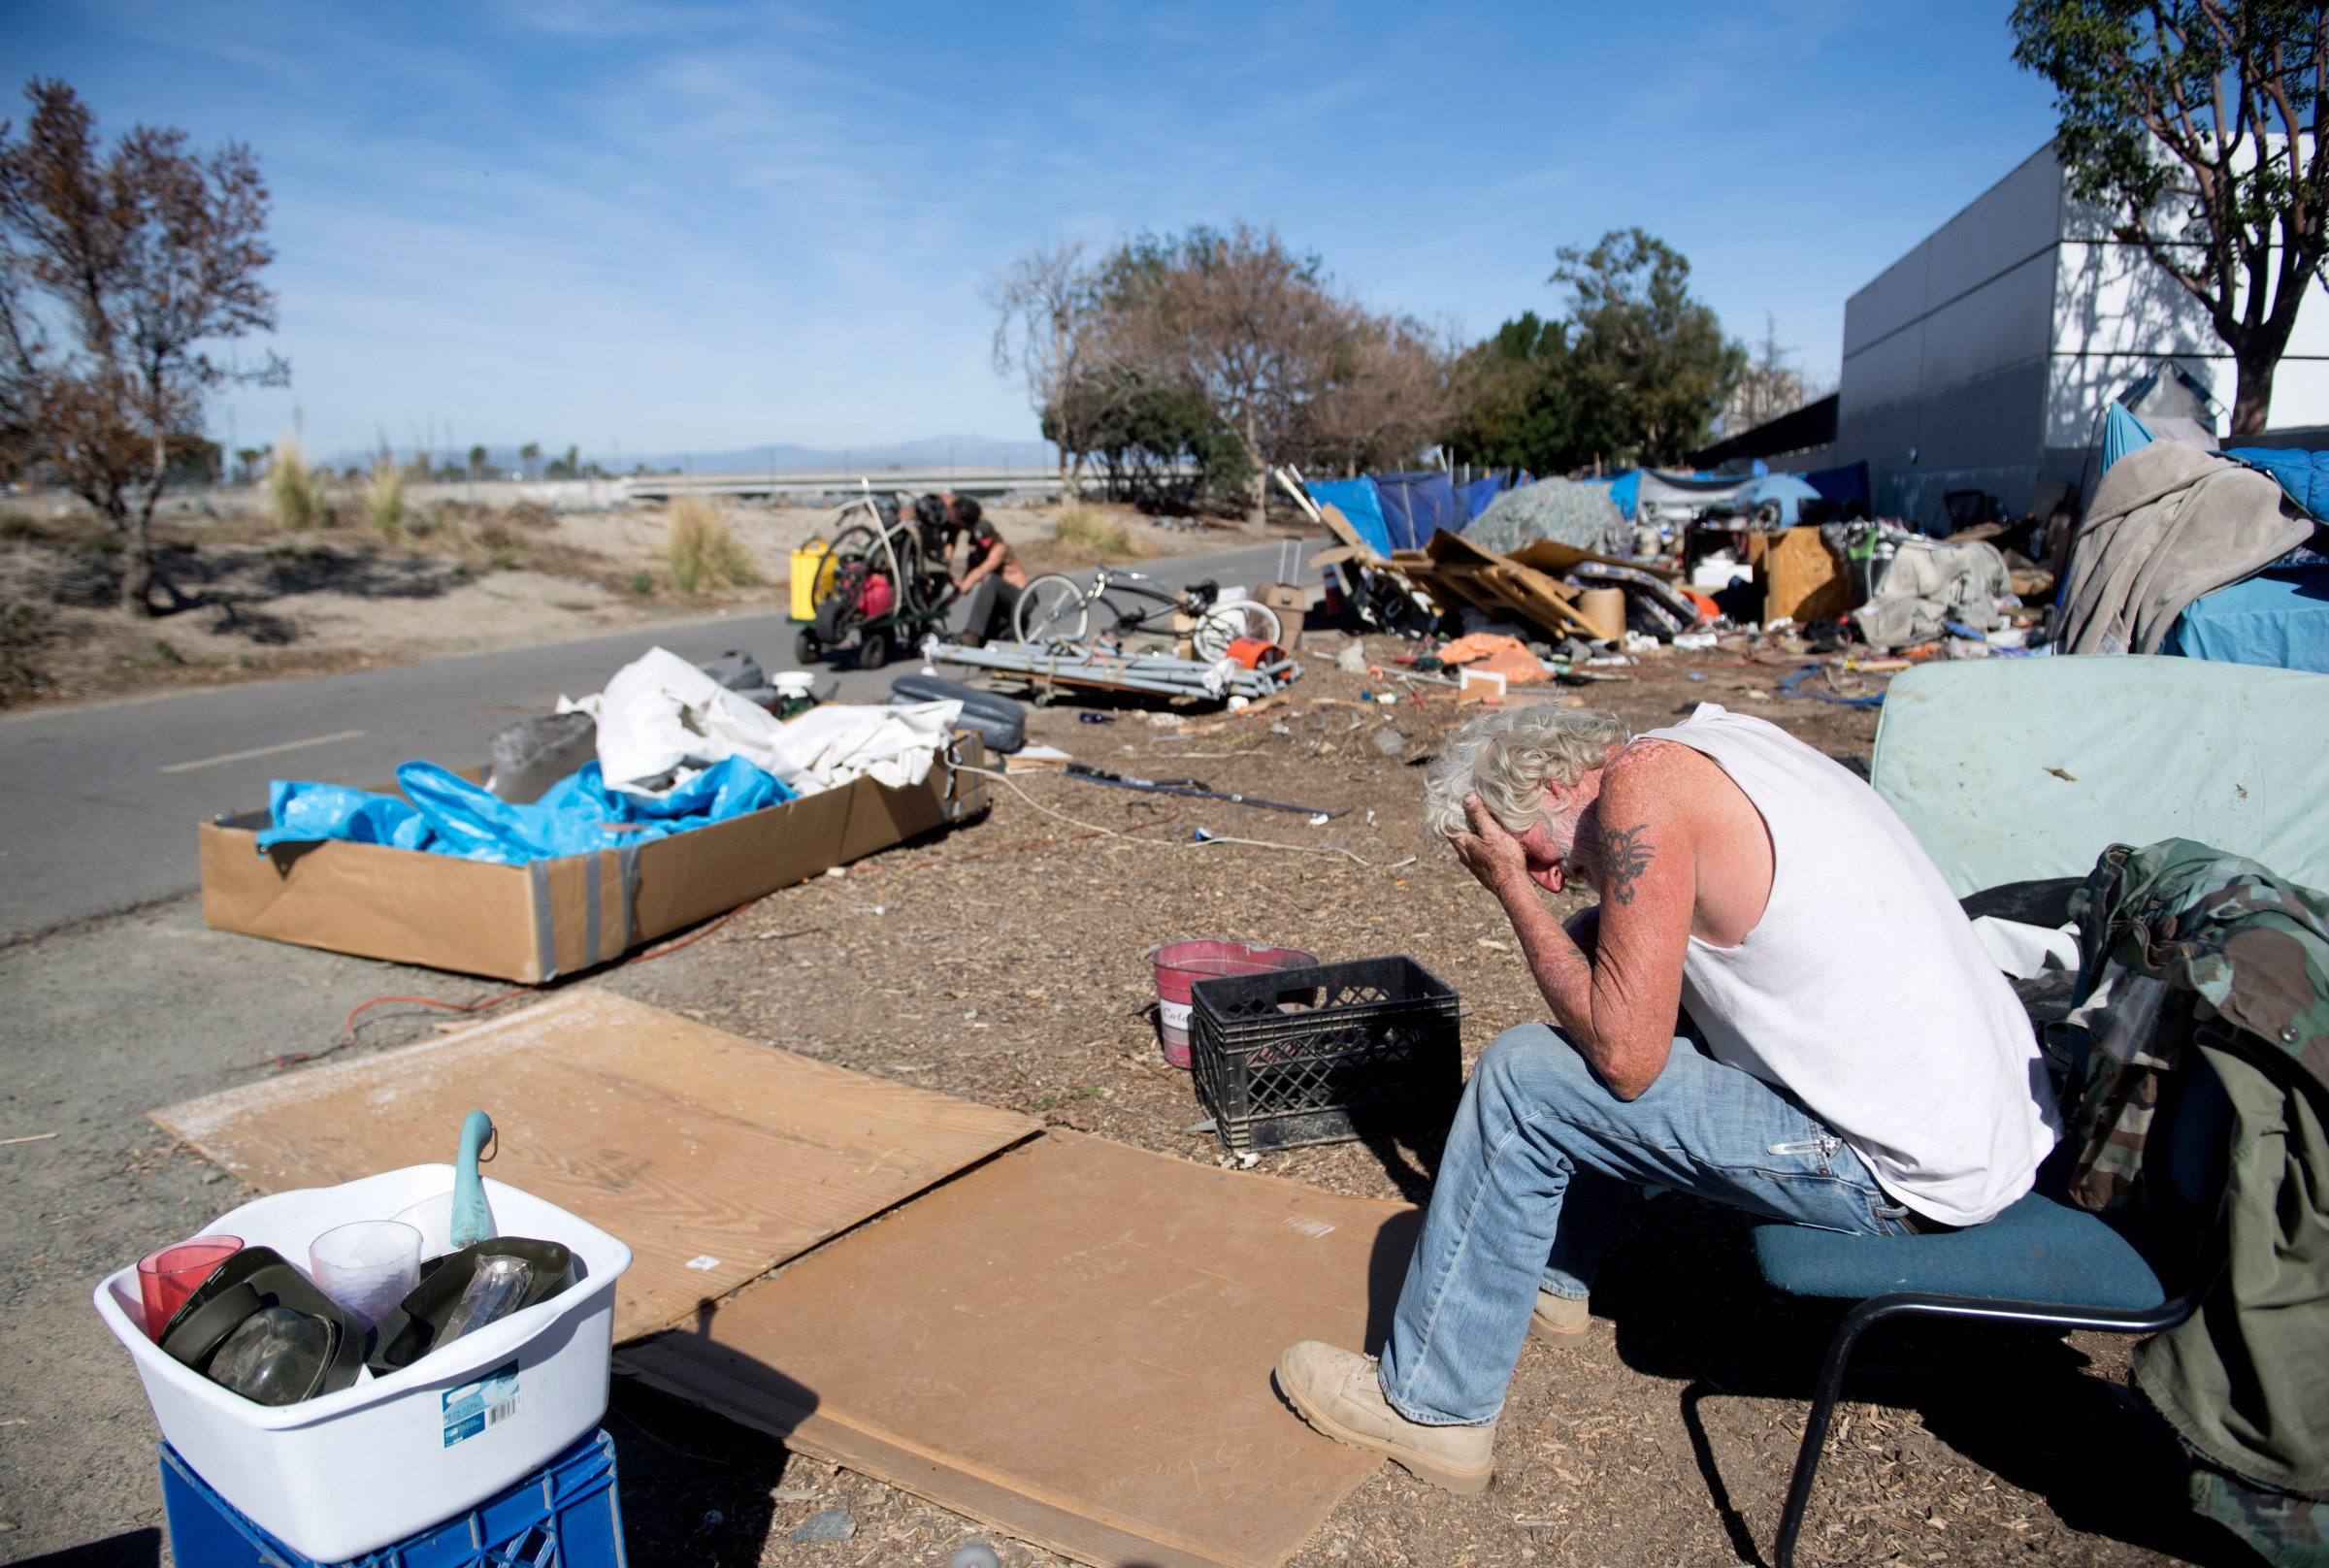 The Supreme Court doesn’t seem eager to get involved with homelessness policy